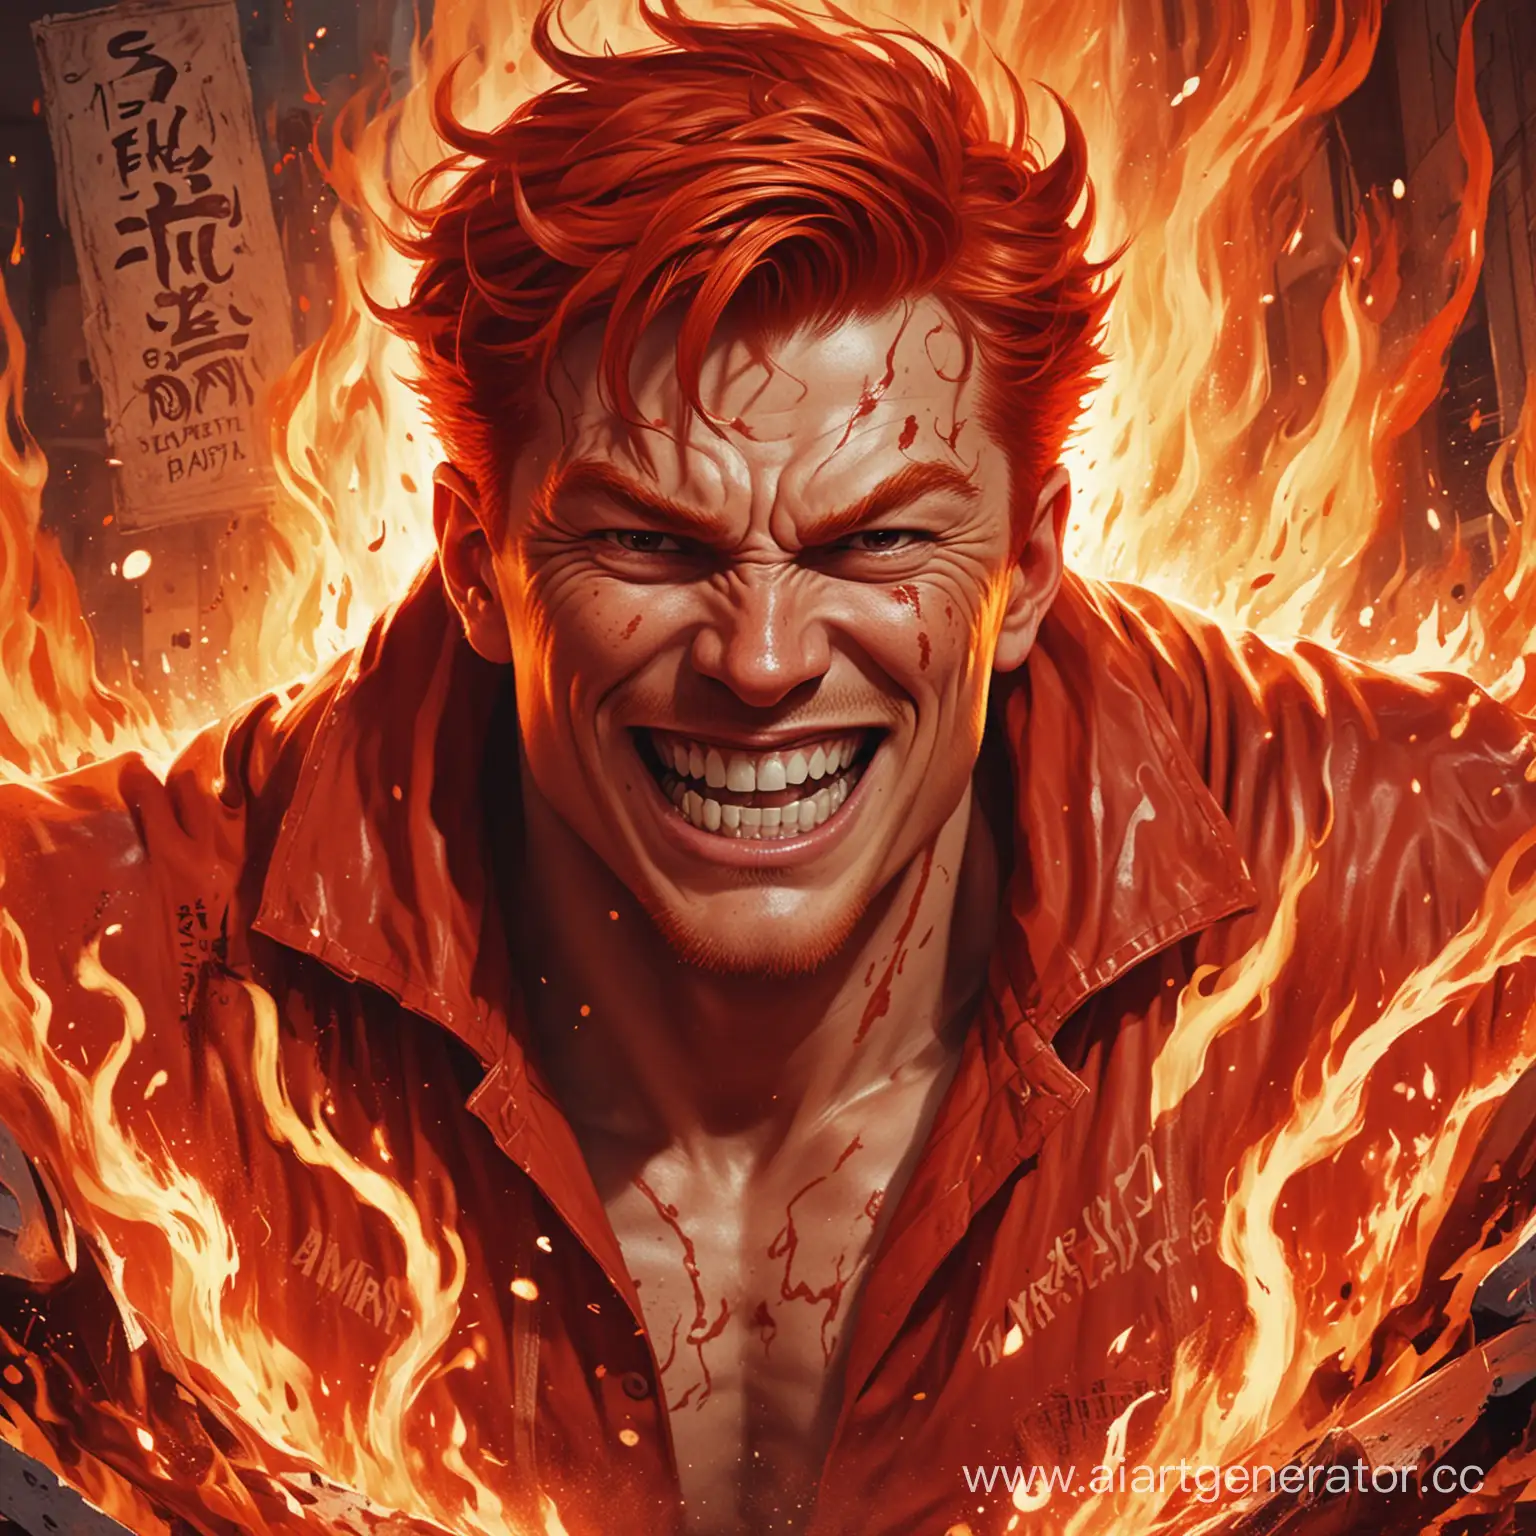 Fiery-RedHaired-Man-with-Demon-Smile-Amid-ComicStyle-Inscriptions